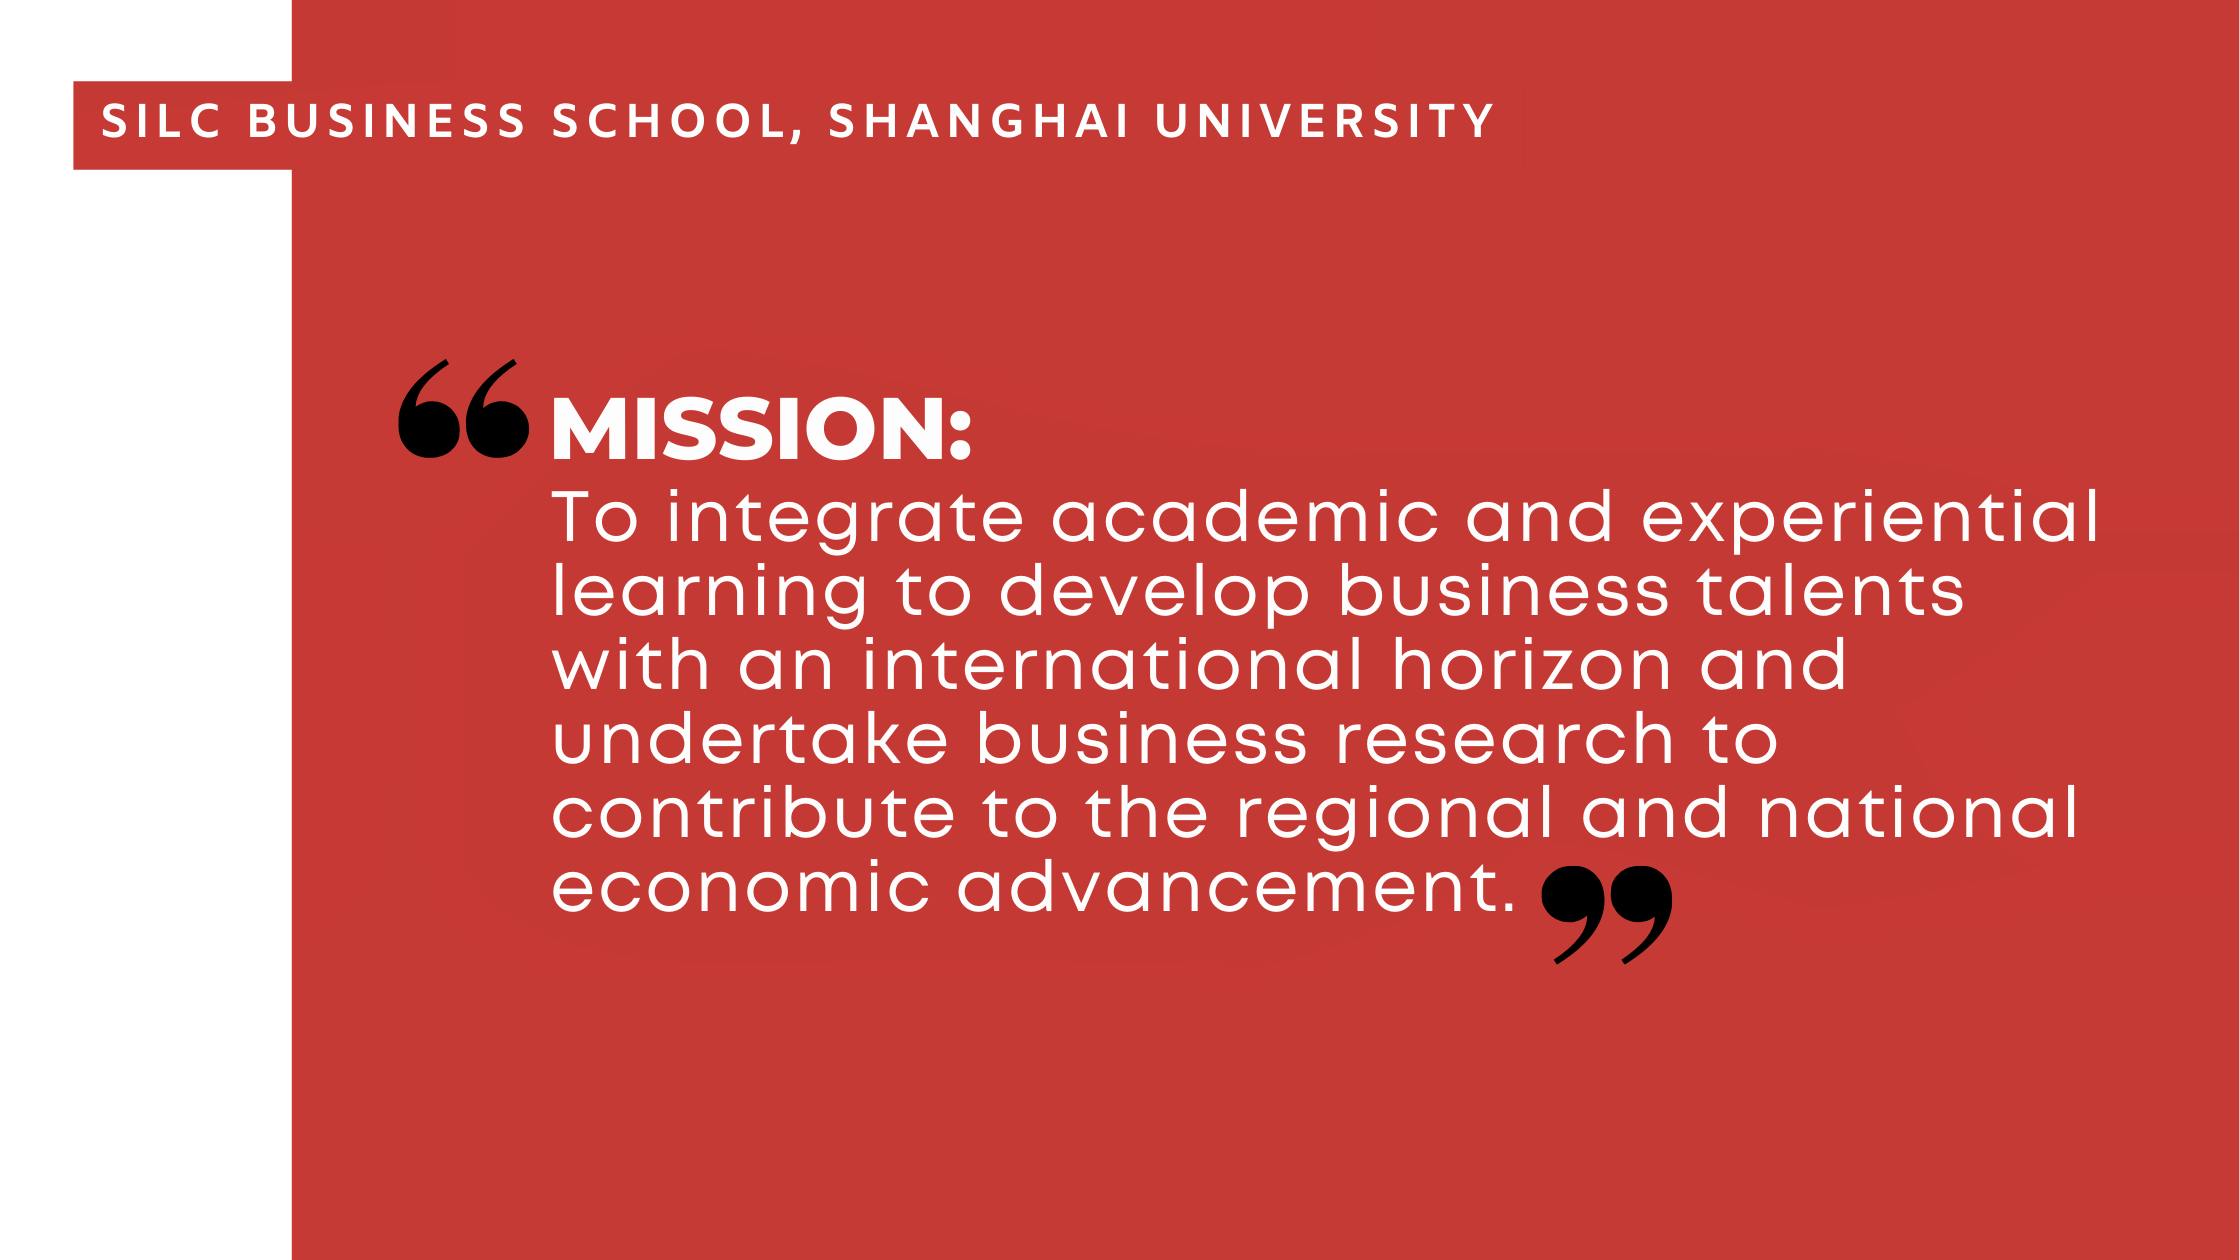 Mission: To integrate academic and experiential learning to develop business talents with an international horizon and undertake business research to contribute to the regional and national economic advancement.